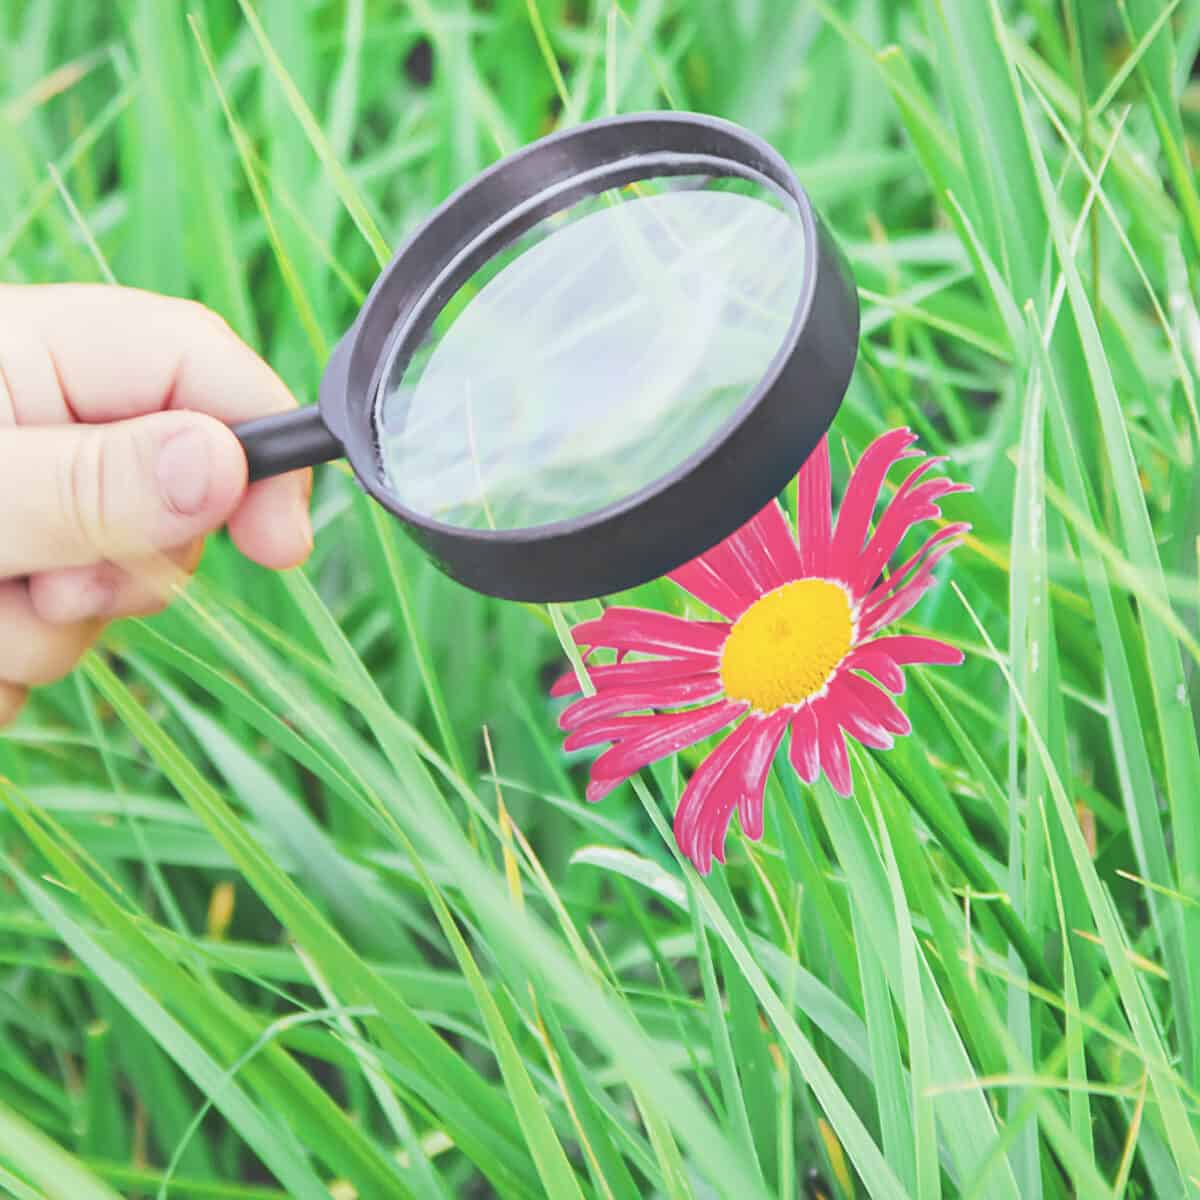 A magnifying glass over a pink flower in a grassy meadow.